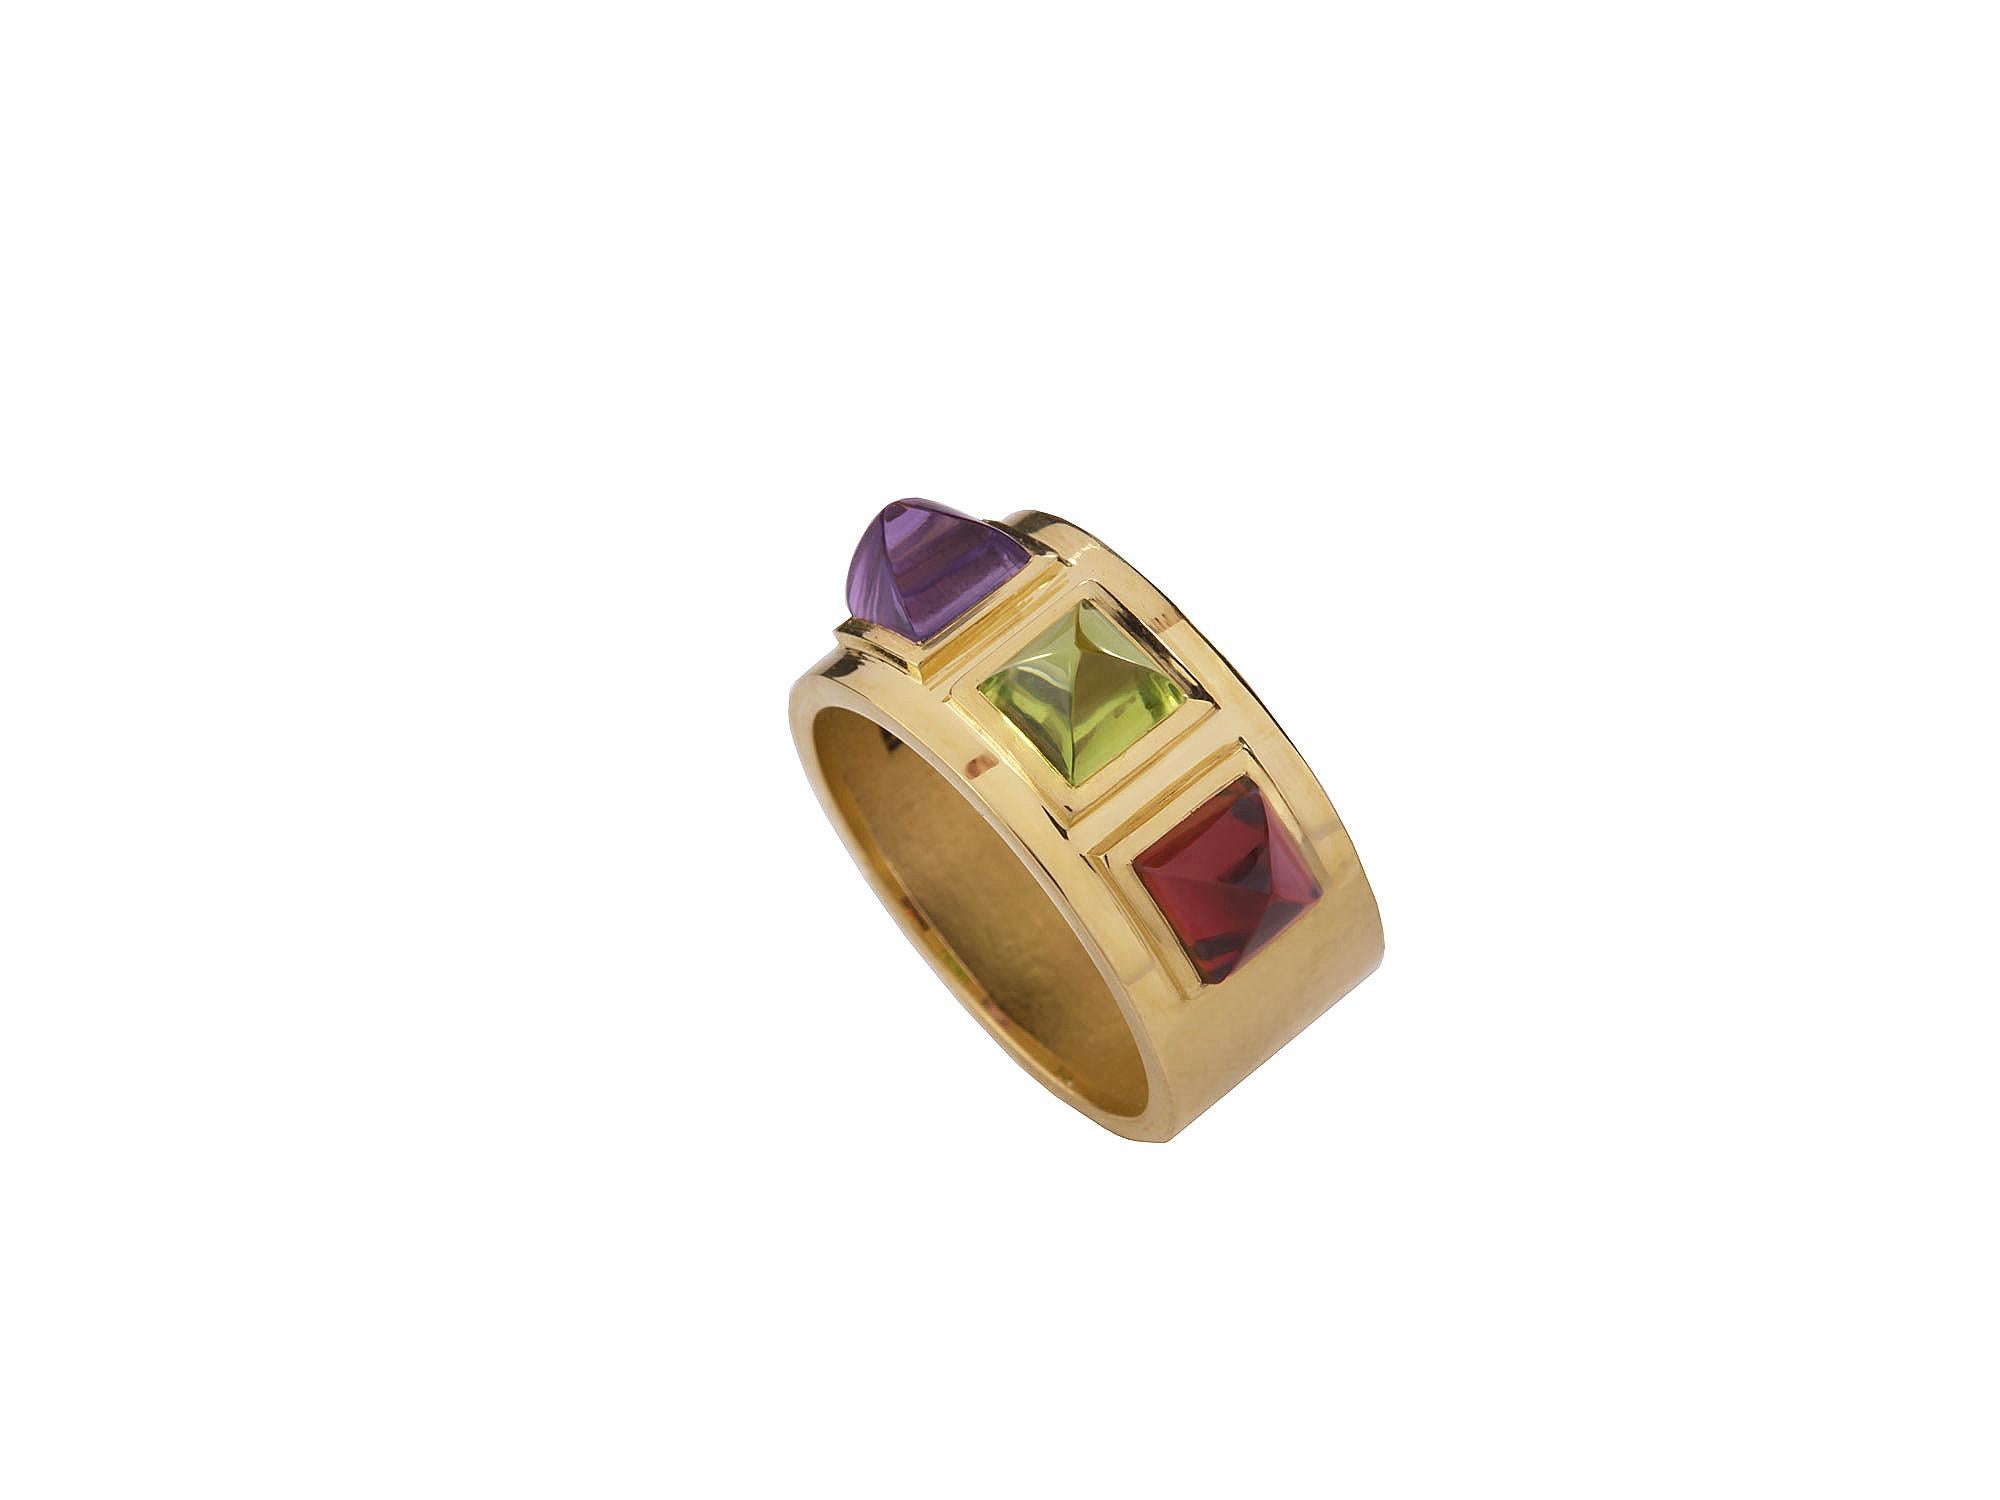 Contemporary 18 Karat Yellow Gold Piramidal Cut Stones BenBen Ring. Sustainable Fine Jewelry For Sale